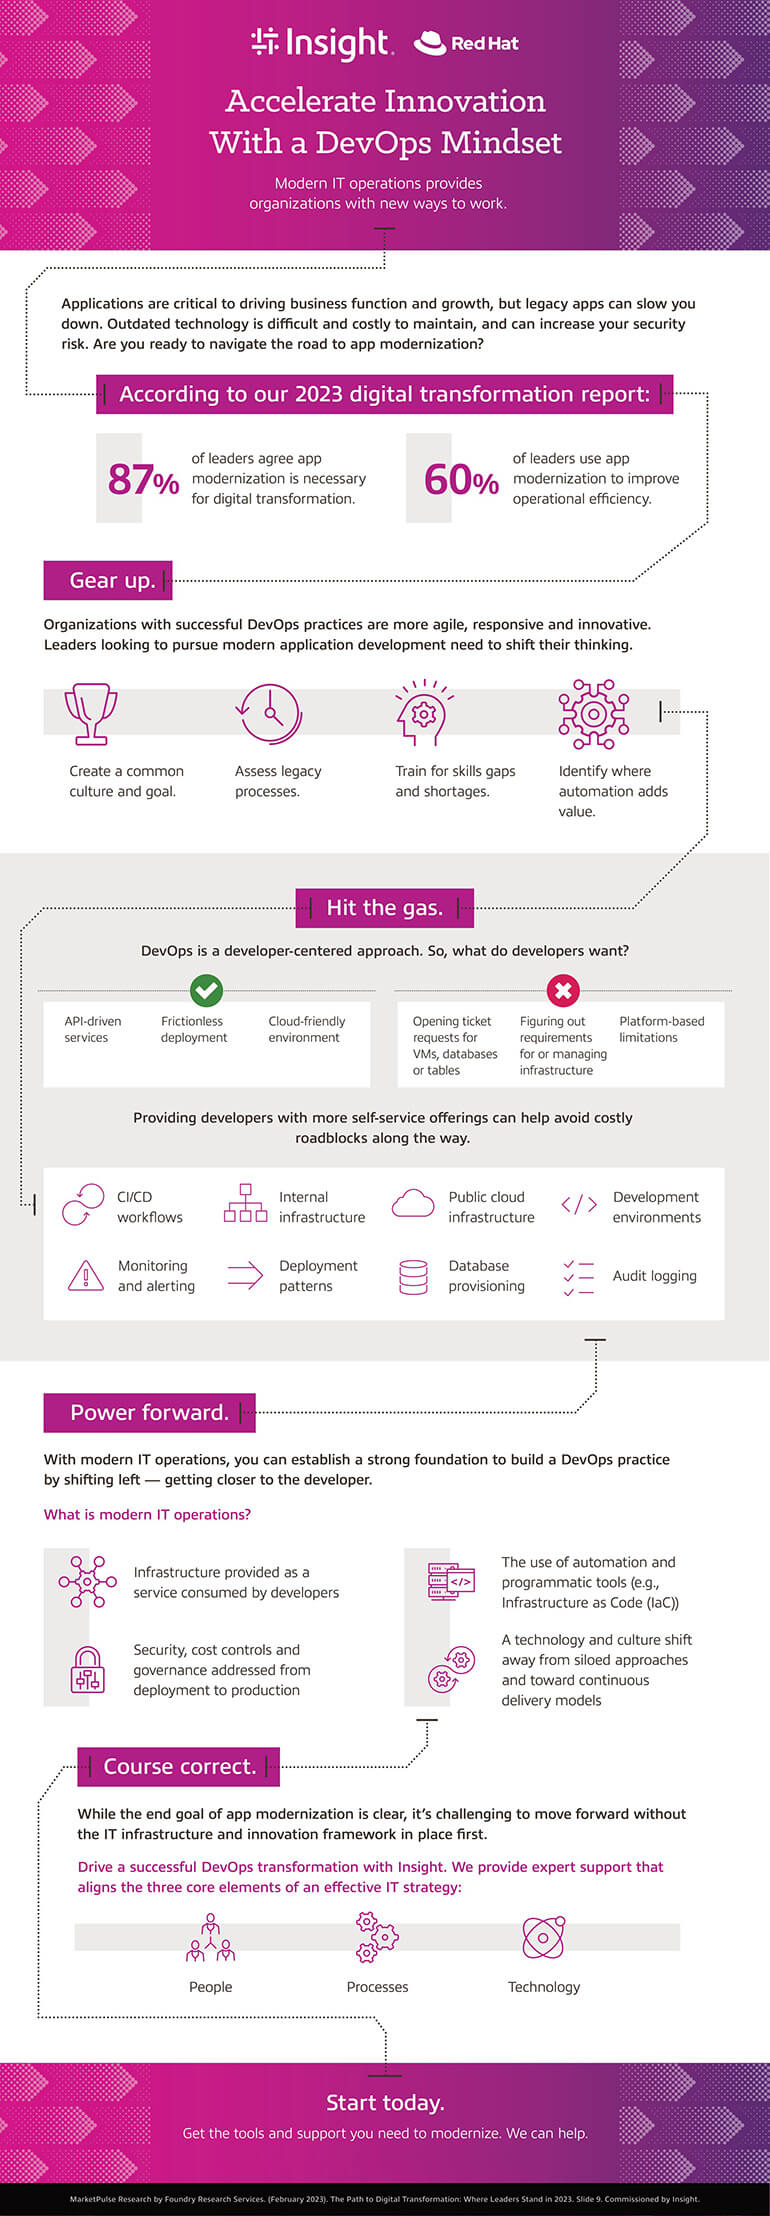 Accelerate Innovation With a DevOps Mindset infographic as transcribed below